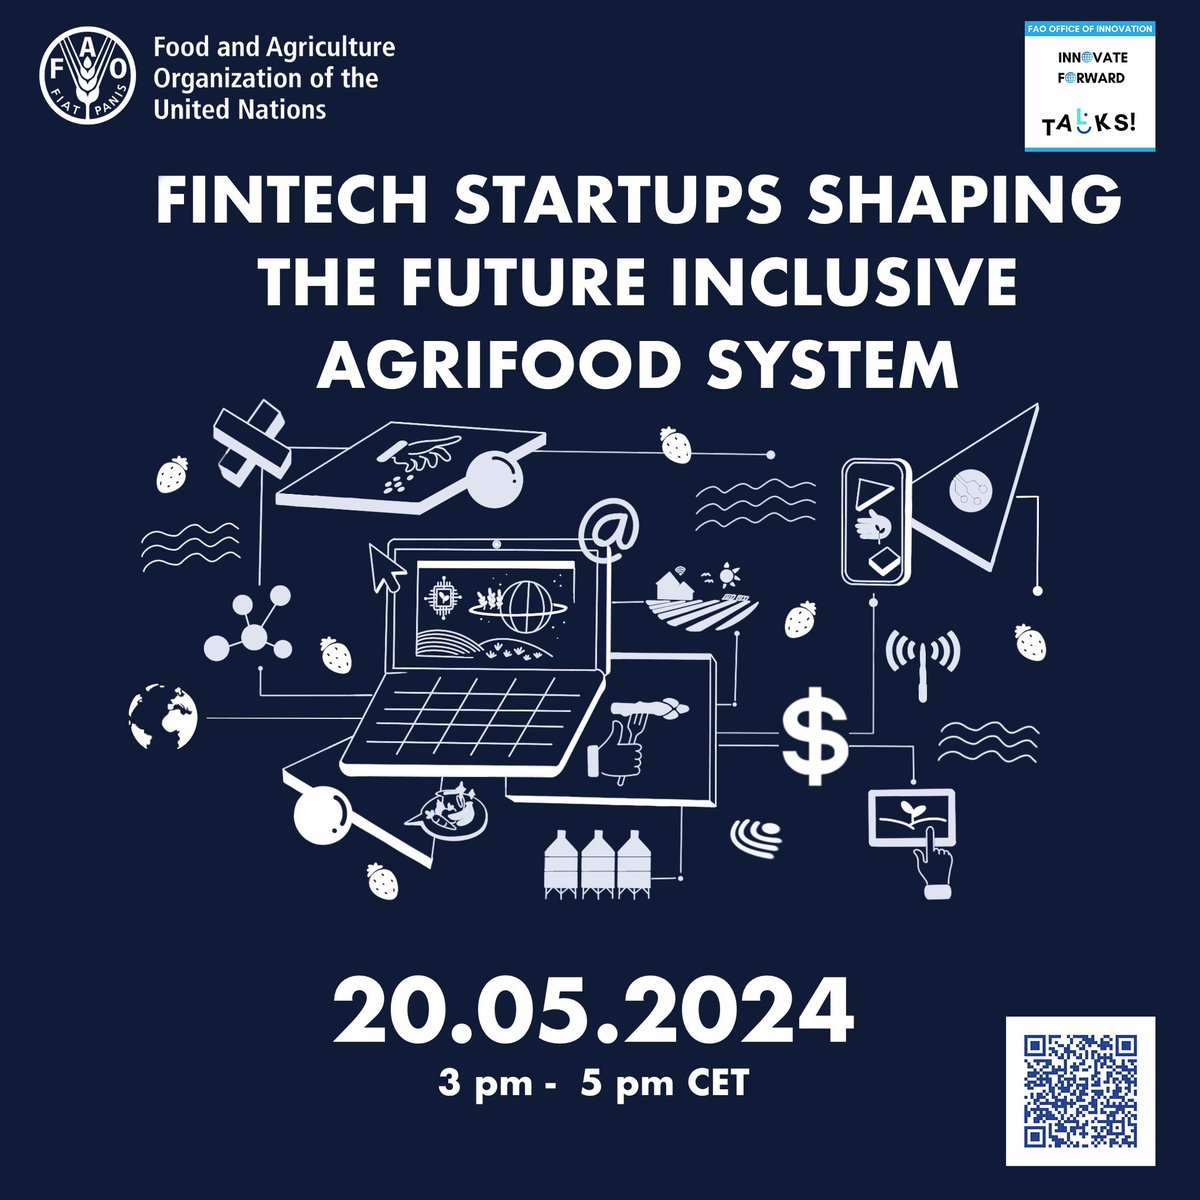 Join us for a discussion on the role of Fintech startups in shaping agrifood systems! Don't miss our Innovation Talks on Fintech Startups Shaping the Future of Inclusive Agrifood Systems on May 20th, 3-5 pm CET. Register here: fao.zoom.us/webinar/regist…